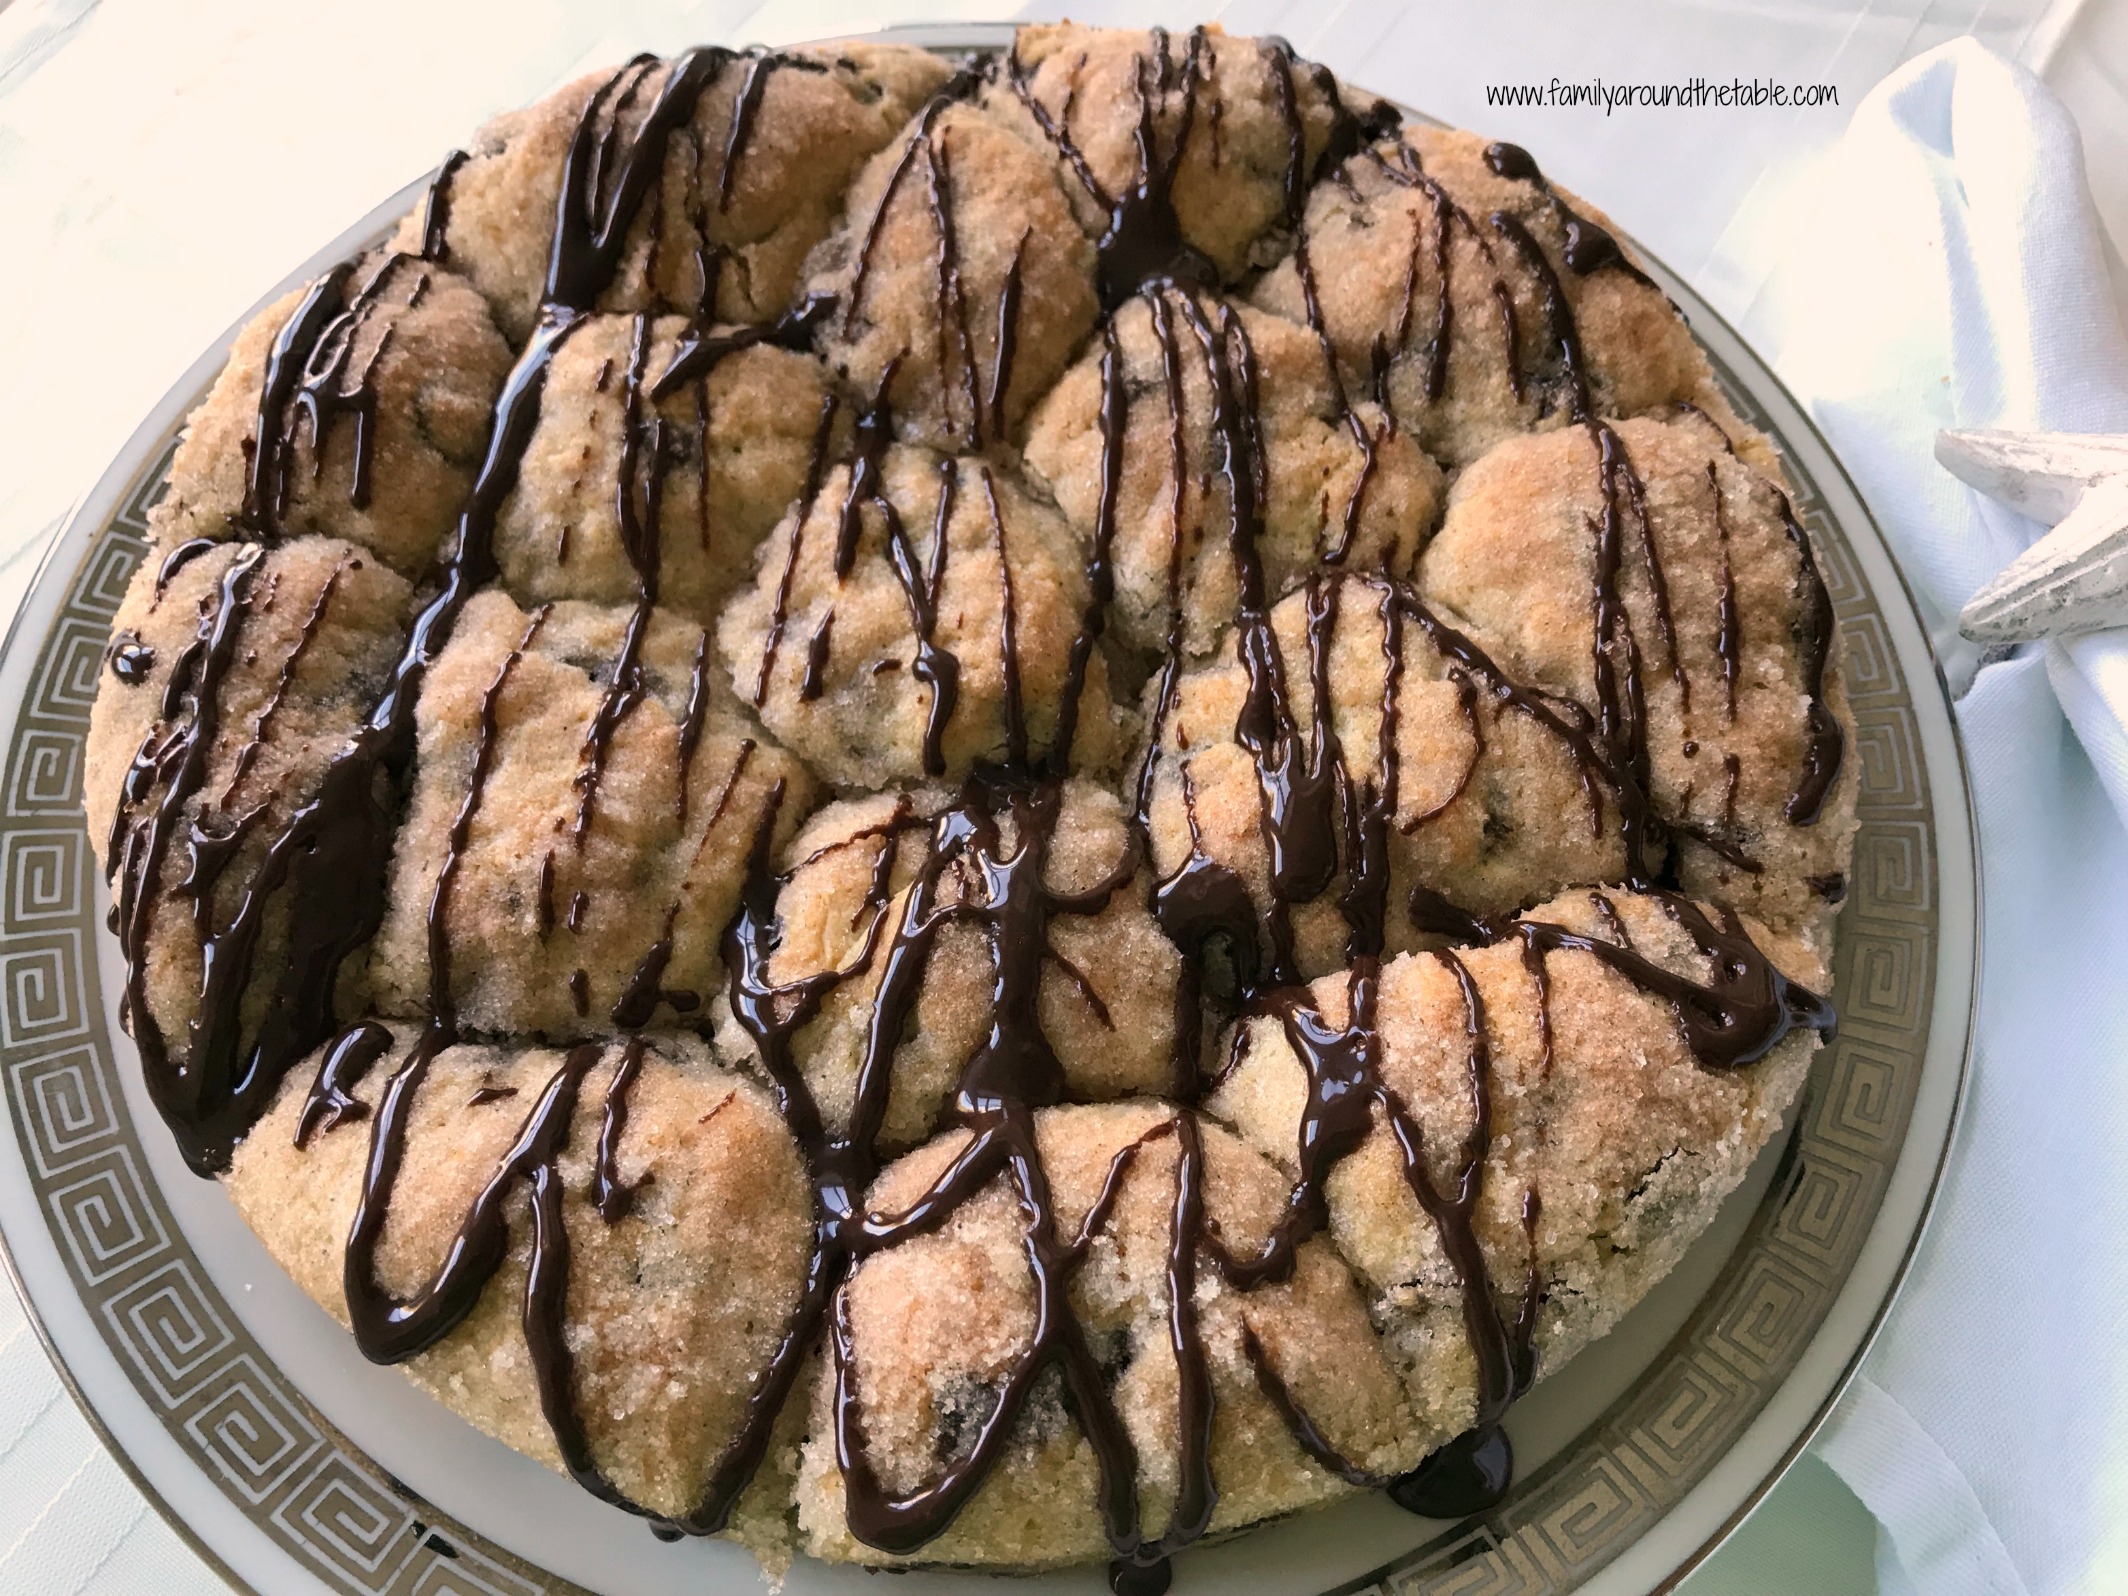 Pull Apart Cinnamon Coffee Cake with Chocolate Glaze will complete your brunch table.